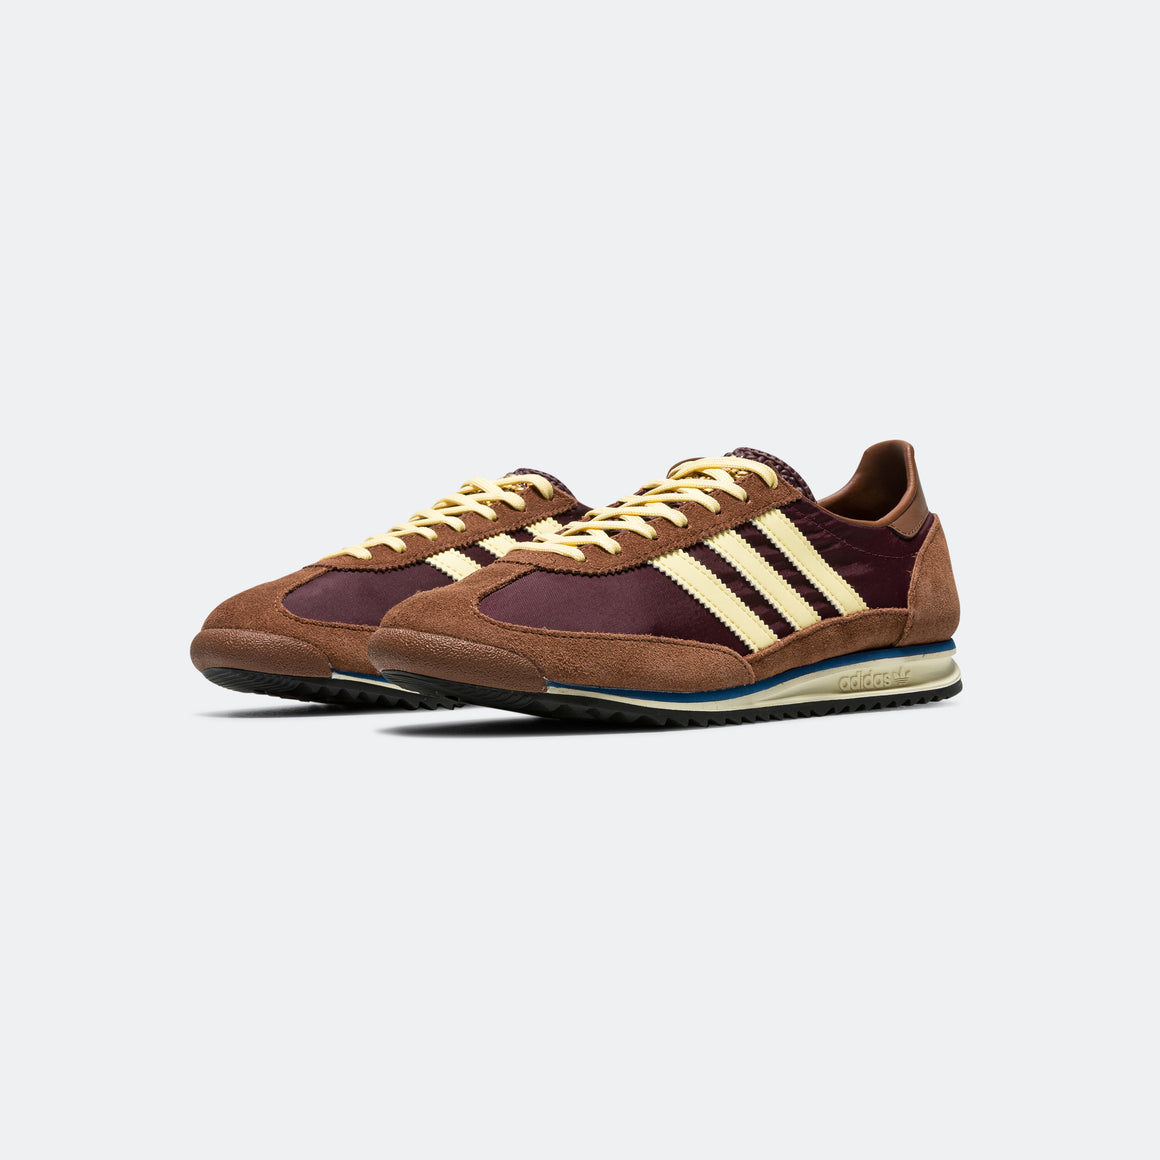 adidas - Womens SL 72 - Maroon/Almost Yellow-Preloved Brown - UP THERE